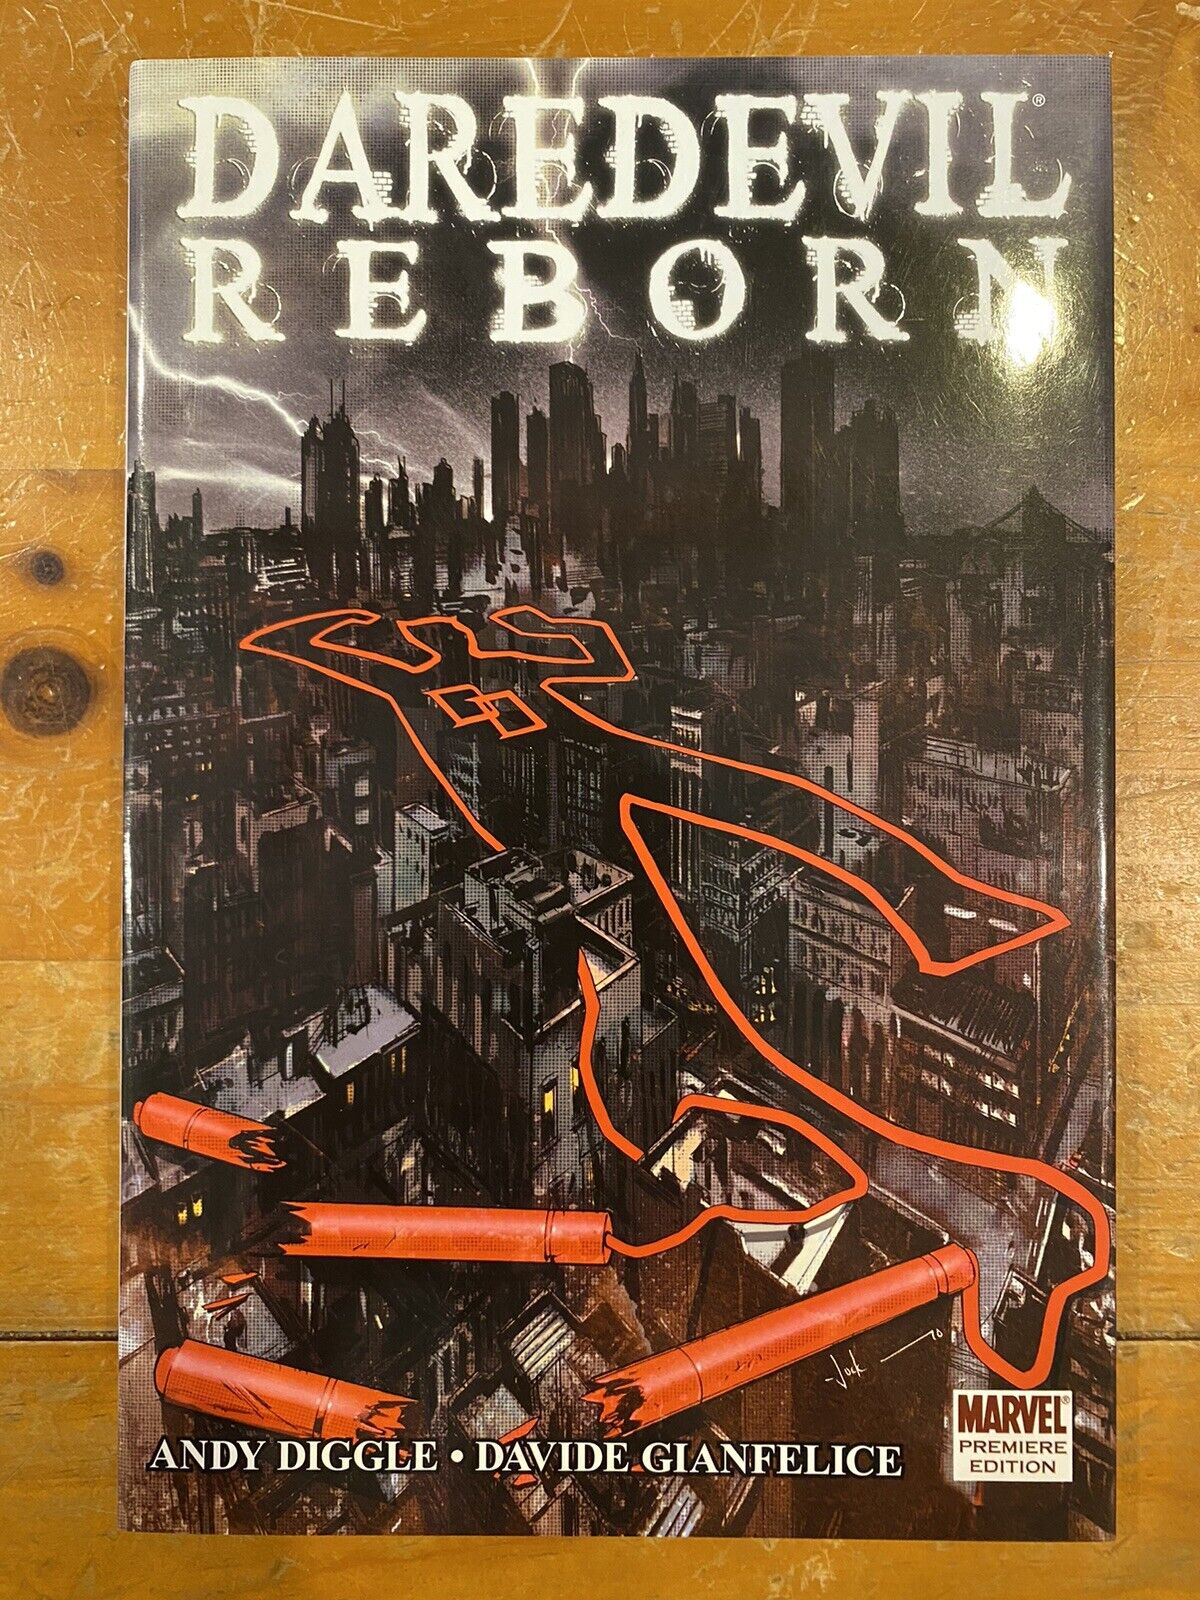 Daredevil Reborn HC by Andy Diggle (Marvel 2011)